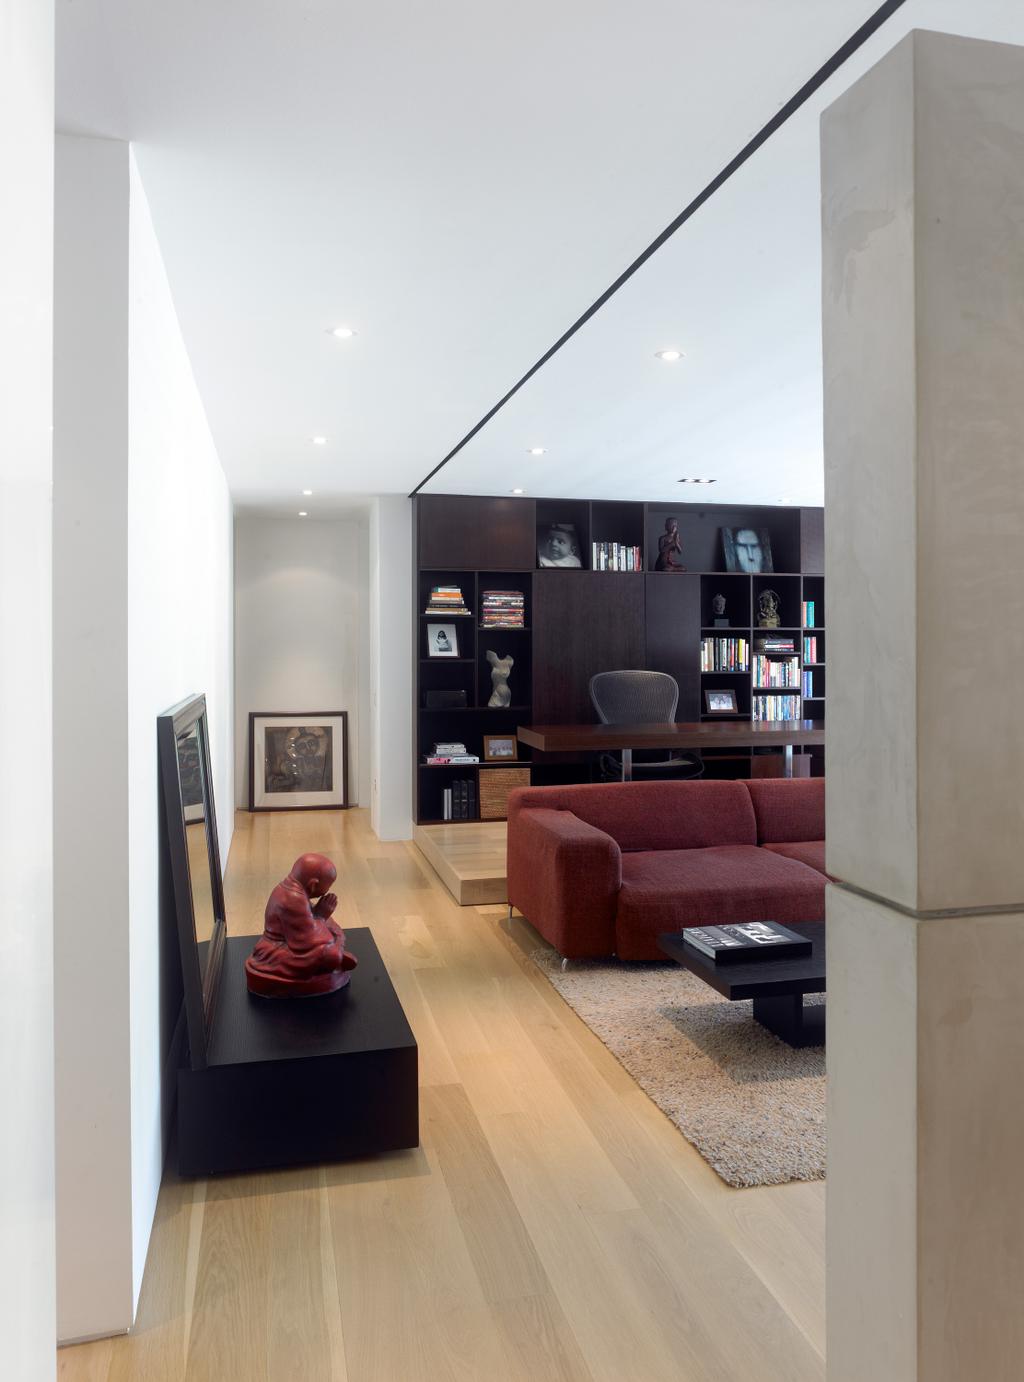 Modern, Condo, Living Room, Peppy's Hill, Architect, Greg Shand Architects, Ceiling Lights, Wooden Flooring, Laminated Floor, Shelf, Buddha Statue, Mirror Frame, Sofa, Red Sofa, Open Shelf, Bookshelf, Carpet, Human, People, Person, Couch, Furniture